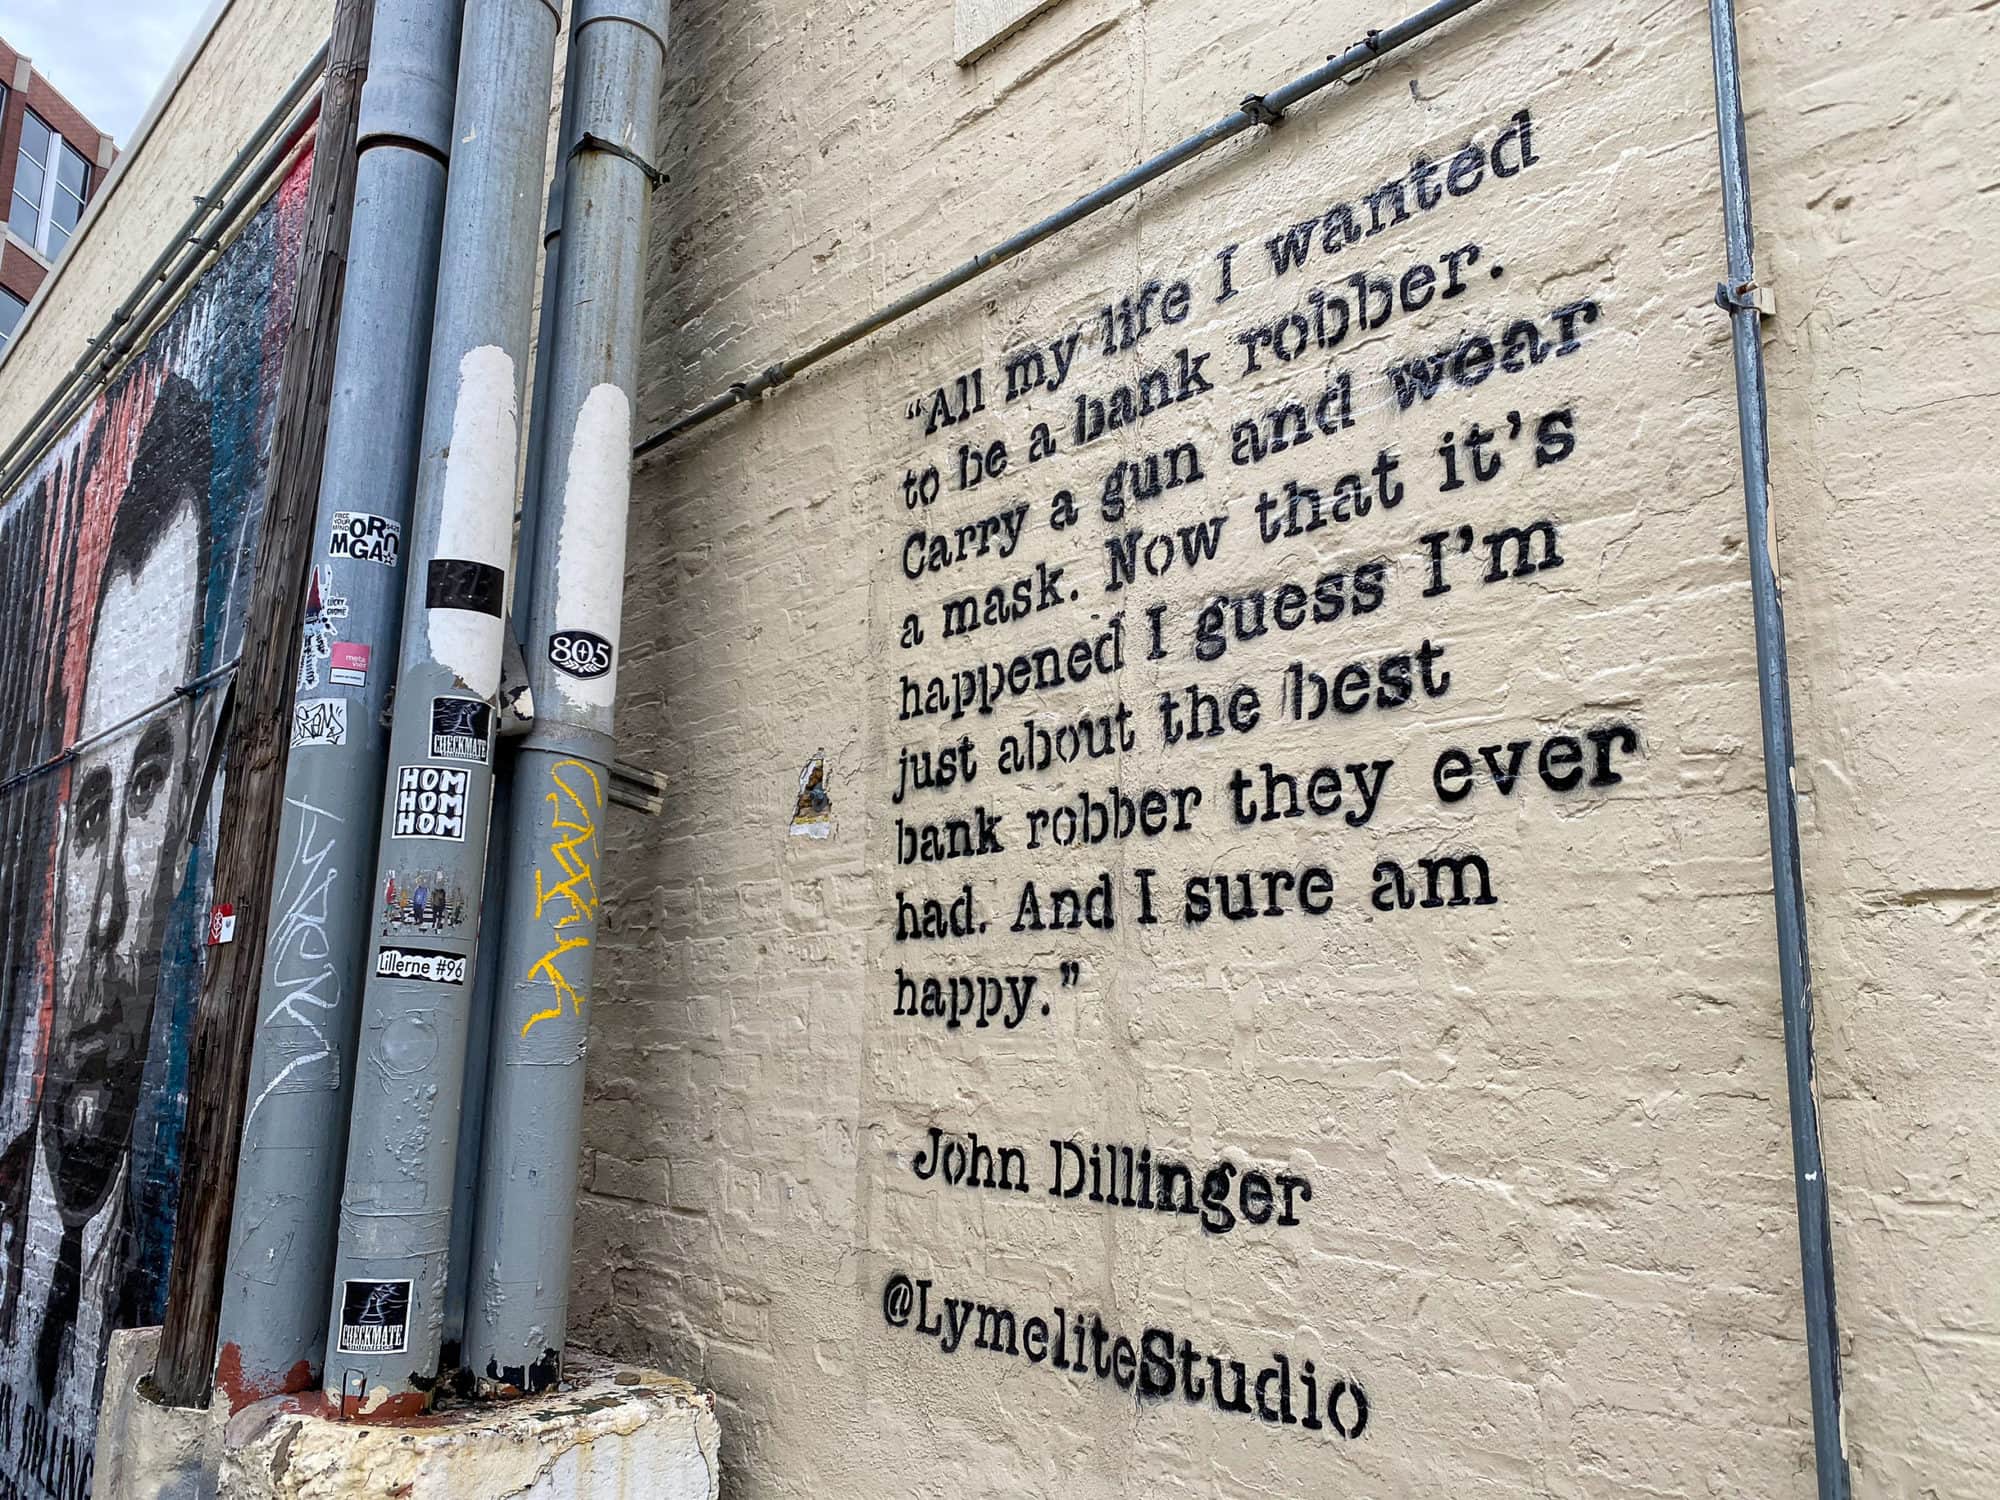 John Dillinger Mural in Chicago. John Dillinger quote: "All my life I wanted to be a bank robber. Carry a gun and wear a mask. Now that it's happened I guess I'm just about the best bank robber they ever had. And I sure am happy."